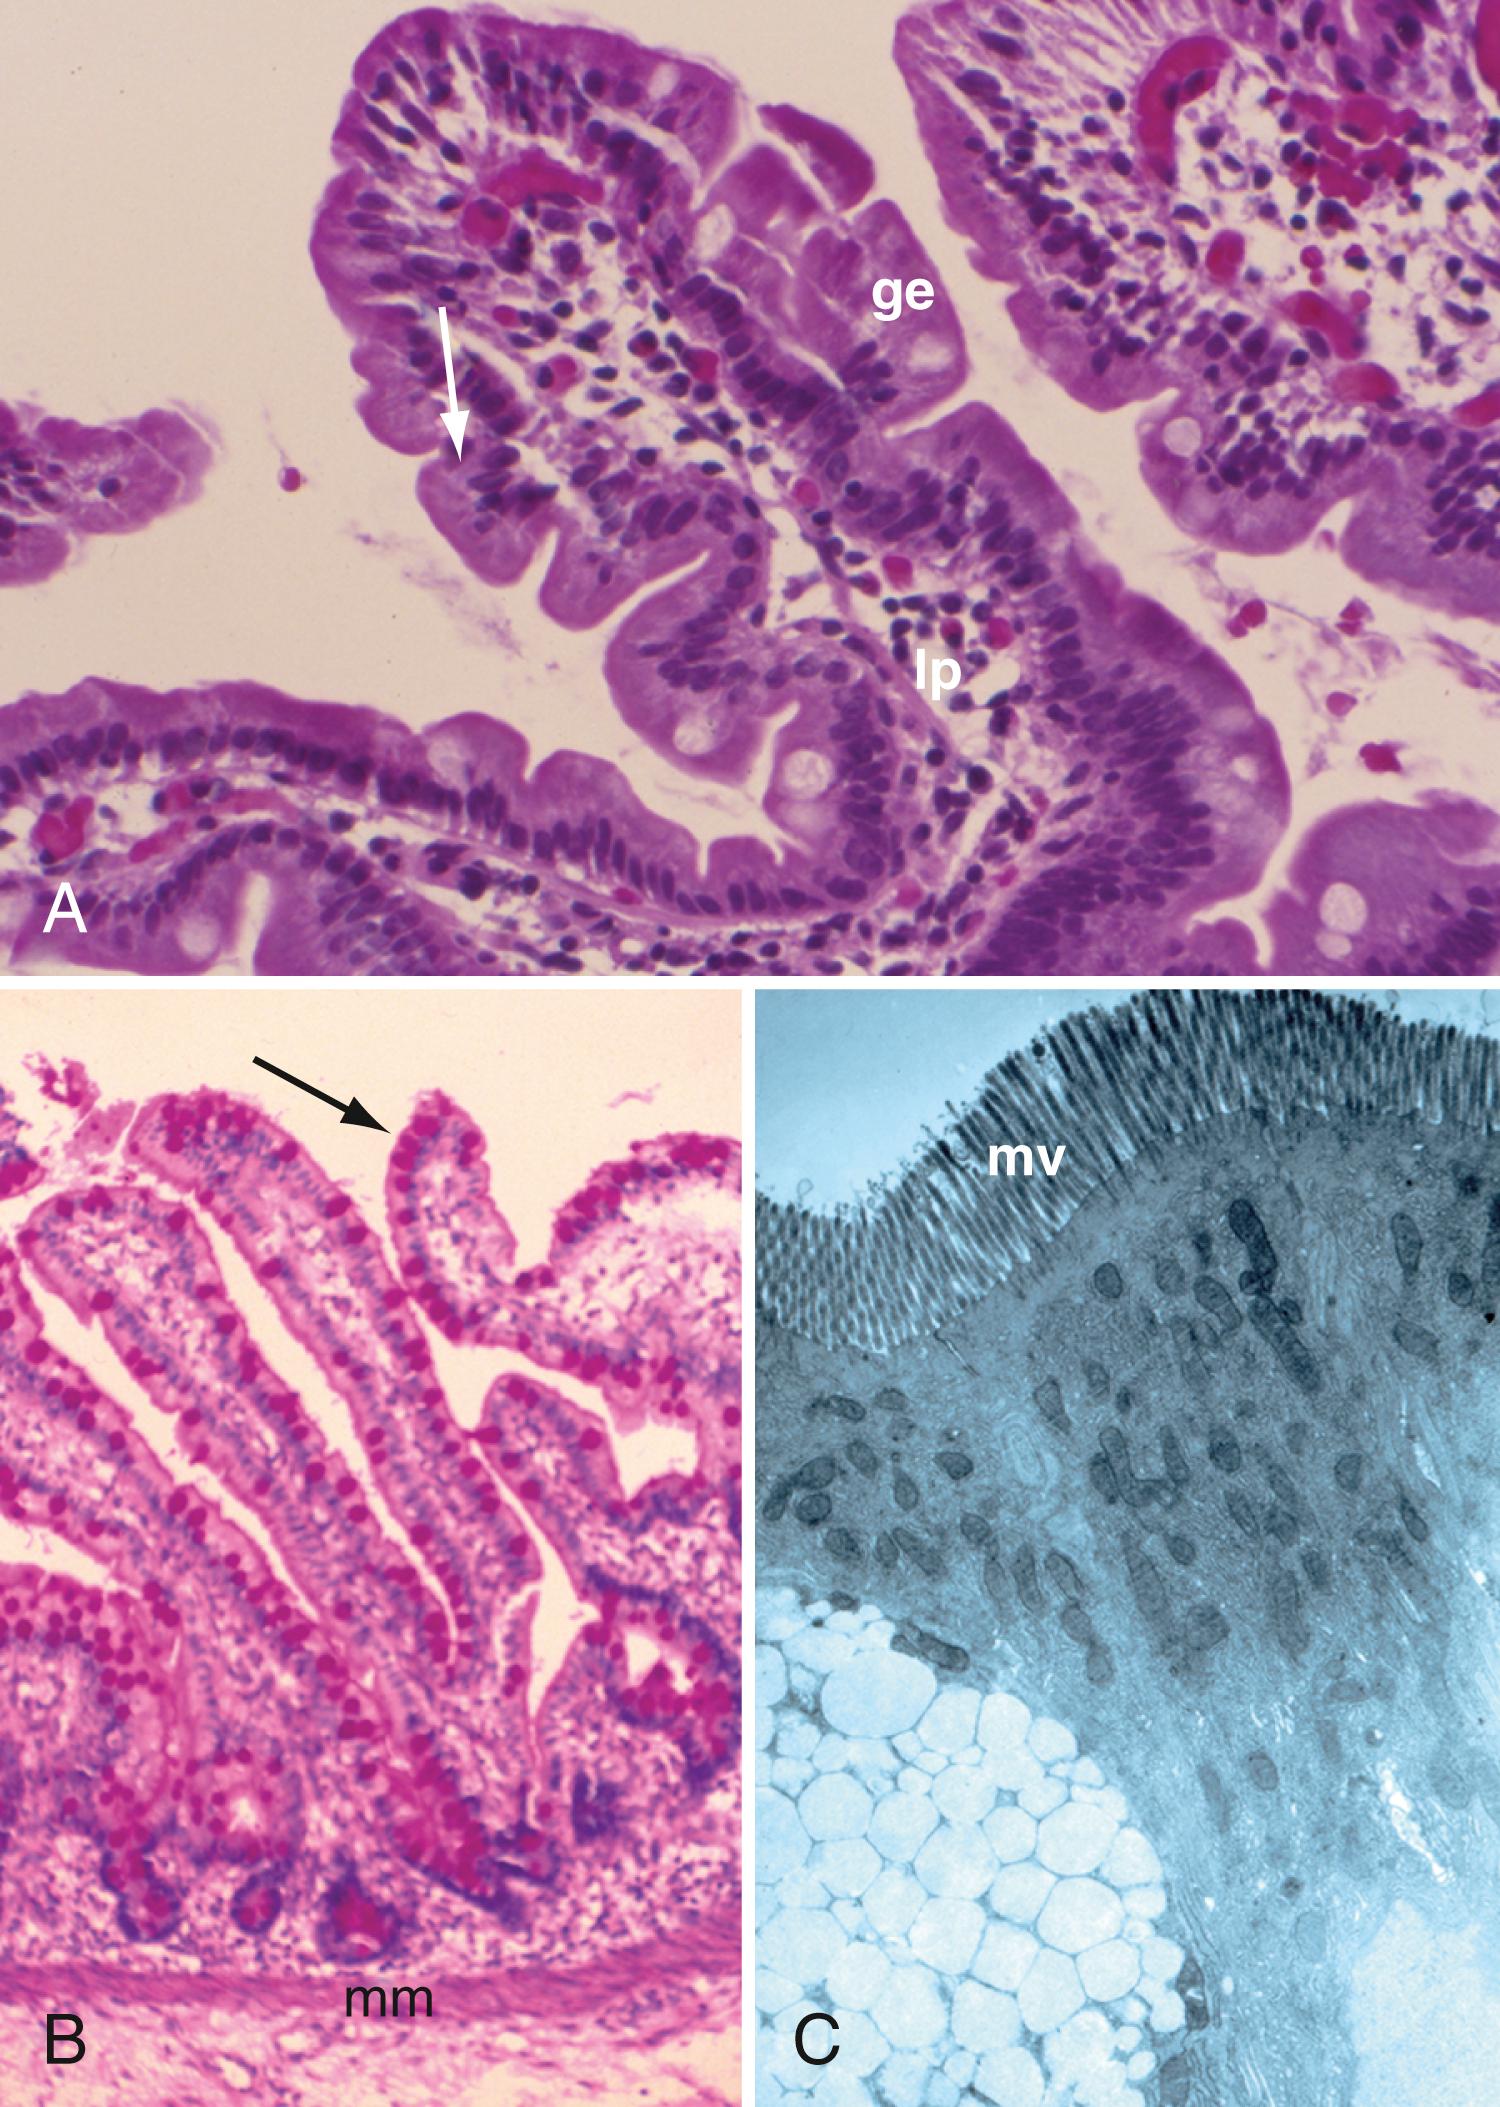 Fig. 98.3, Histologic and electron microscopic photographs of small intestine. A, Components of the mucosa: ge , glandular epithelium; lp , lamina propria. Note the absorptive cells that appear as high columnar cells with eosinophilic cytoplasm ( arrow ). (H&E, ×250.) B, Goblet cells ( arrow ) and brush border are stained red. mm , Muscularis mucosae. (Periodic acid–Schiff stain, ×150.) C, Microvilli ( mv ) are seen as delicate finger-like projections on electron microscopic examination, ×9000.